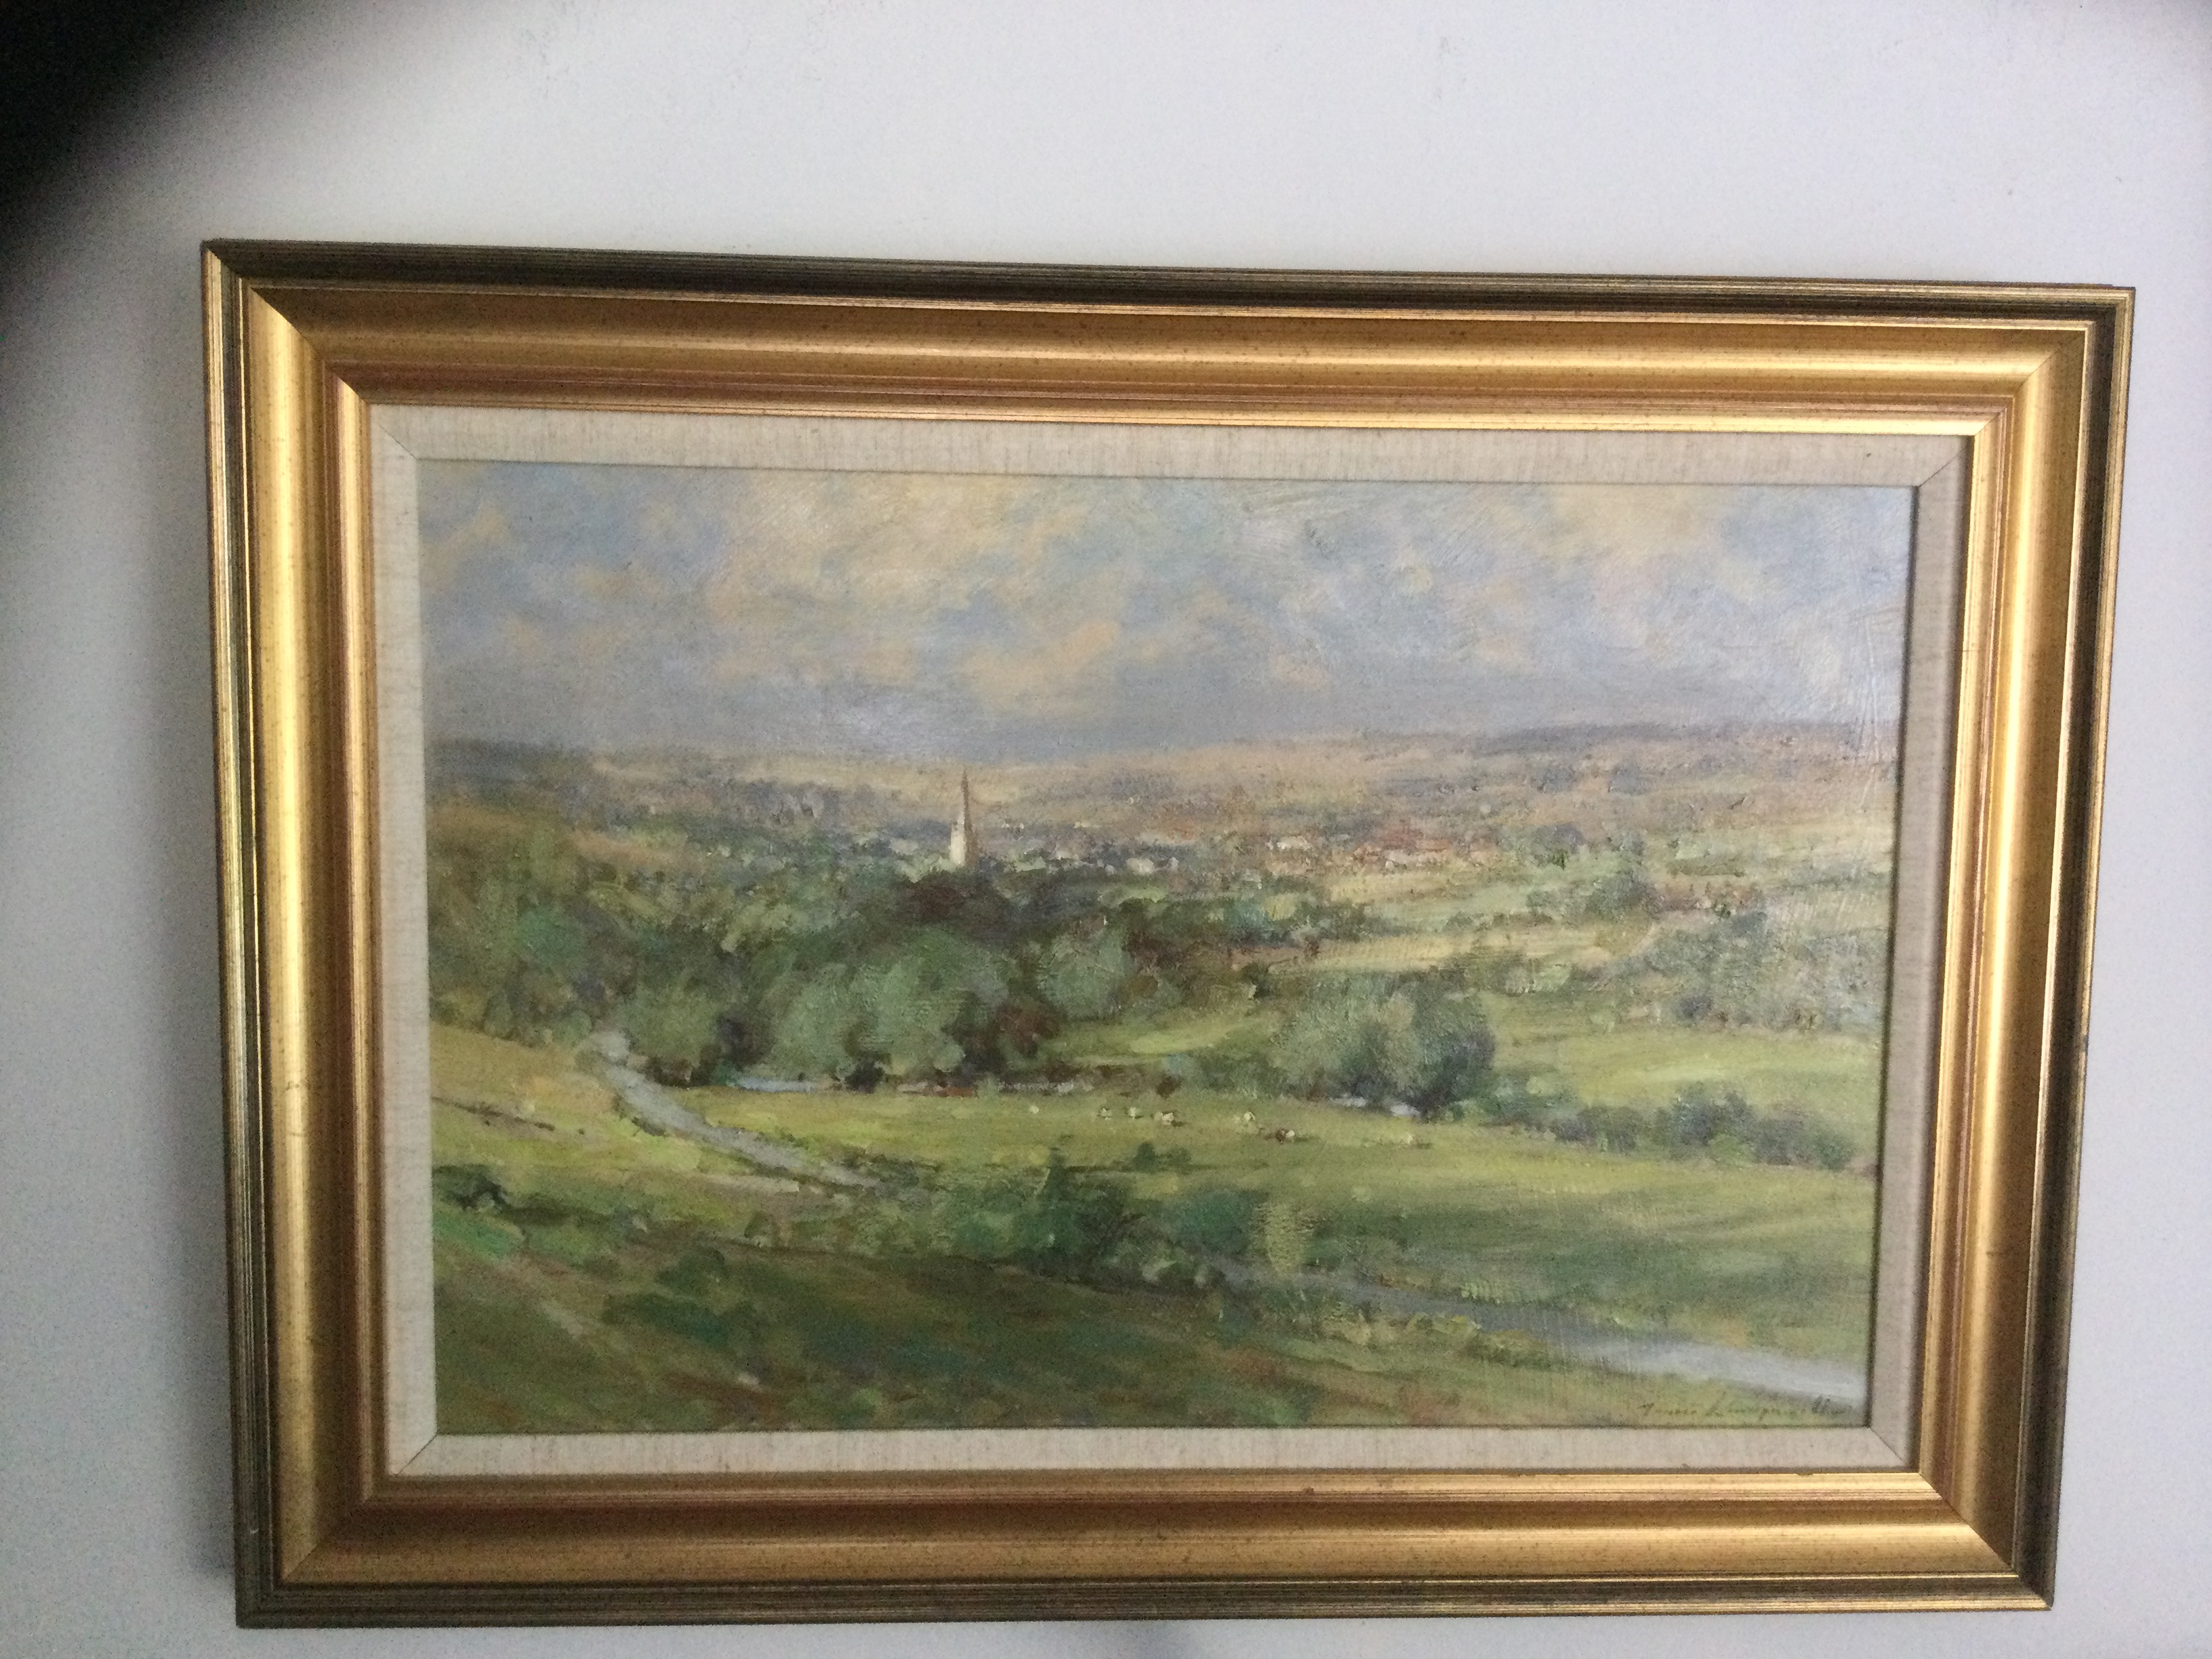 View to Burford Church & Village, Oxfordshire by James Longueville